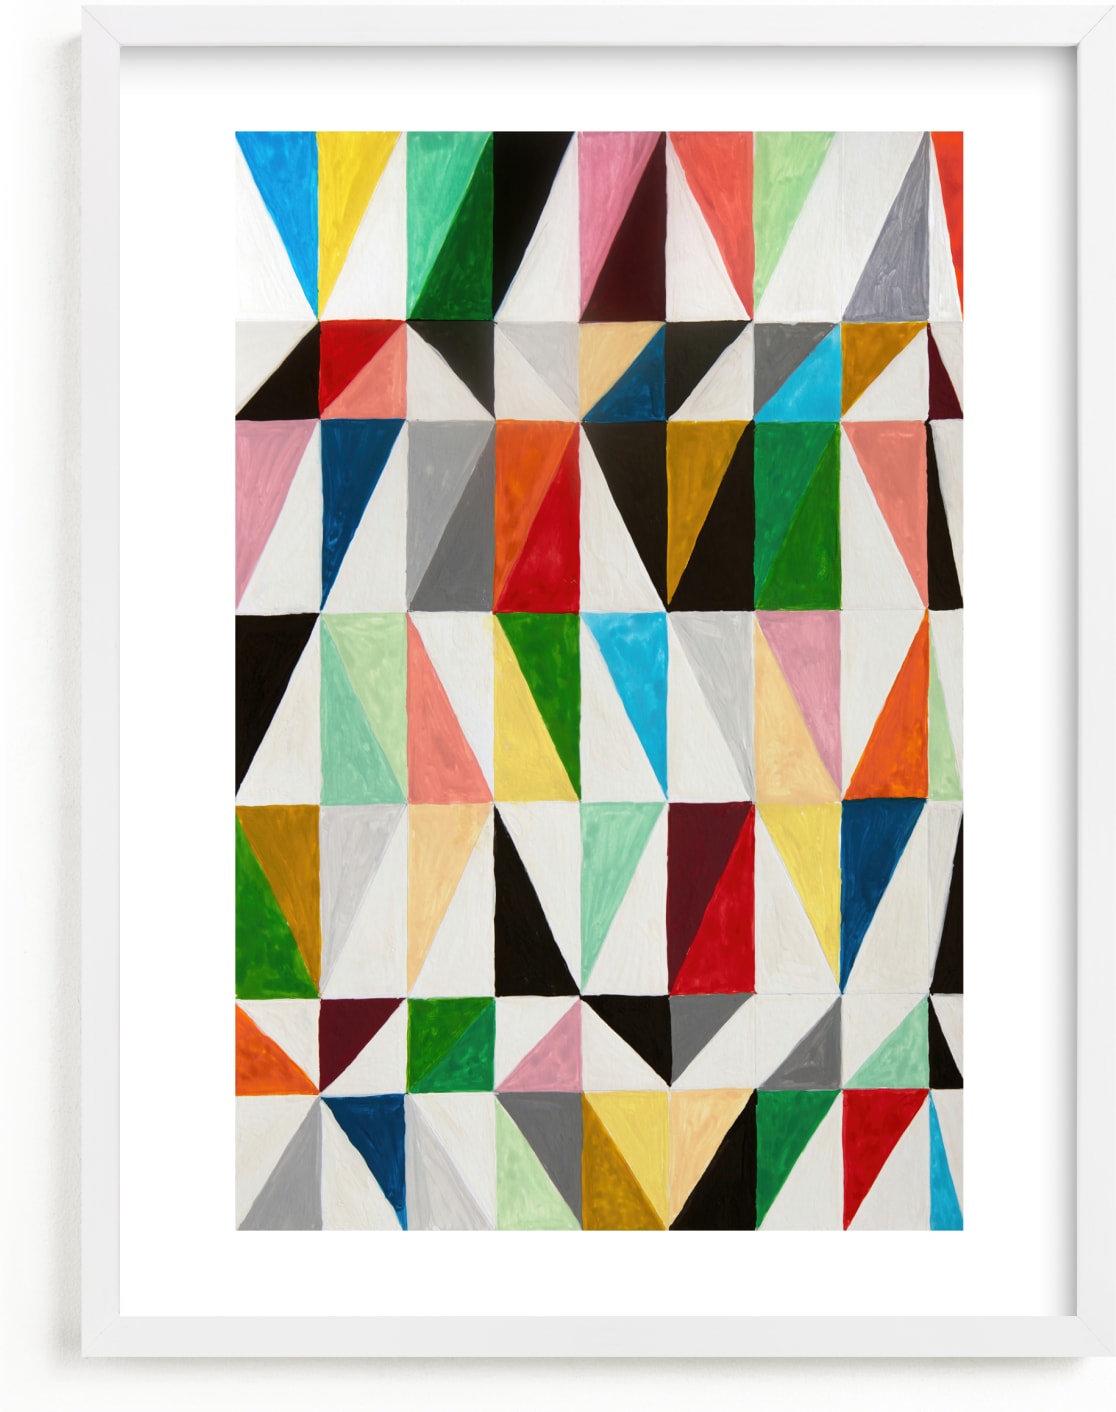 This is a classic colors kids wall art by Jane Clark called Triangle Grid.